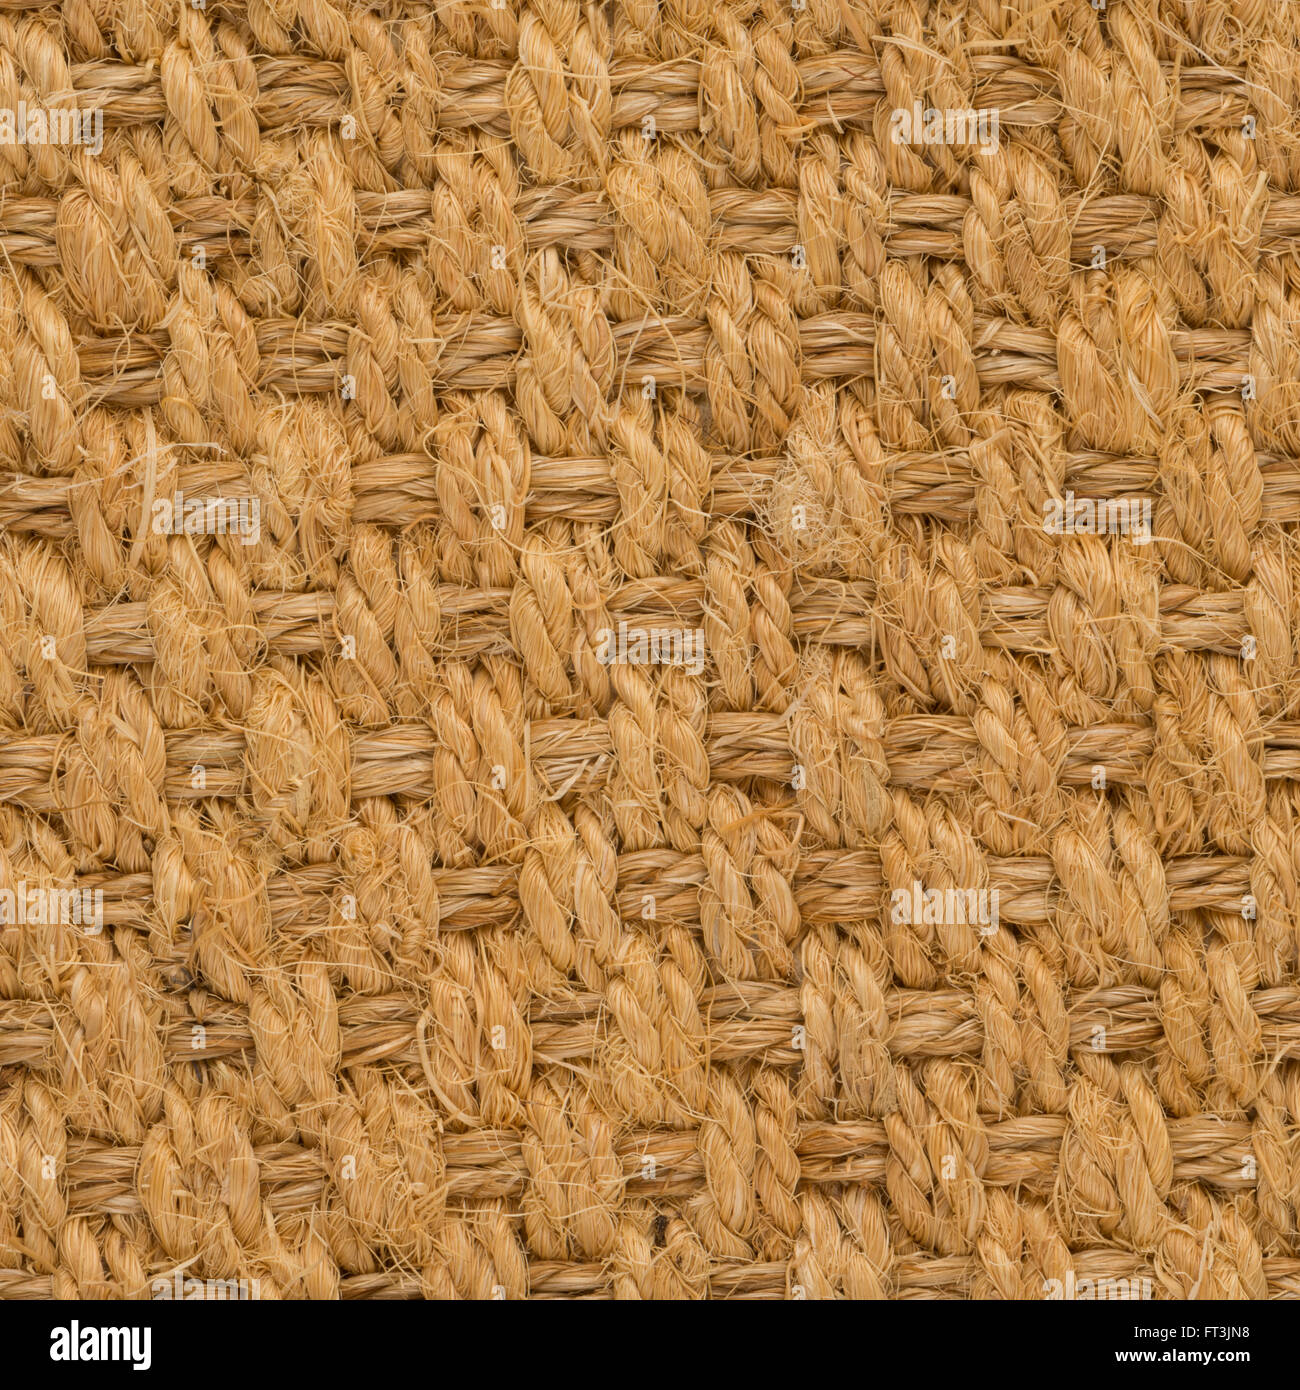 Natural Sisal Fabric Background Stock Photo - Download Image Now